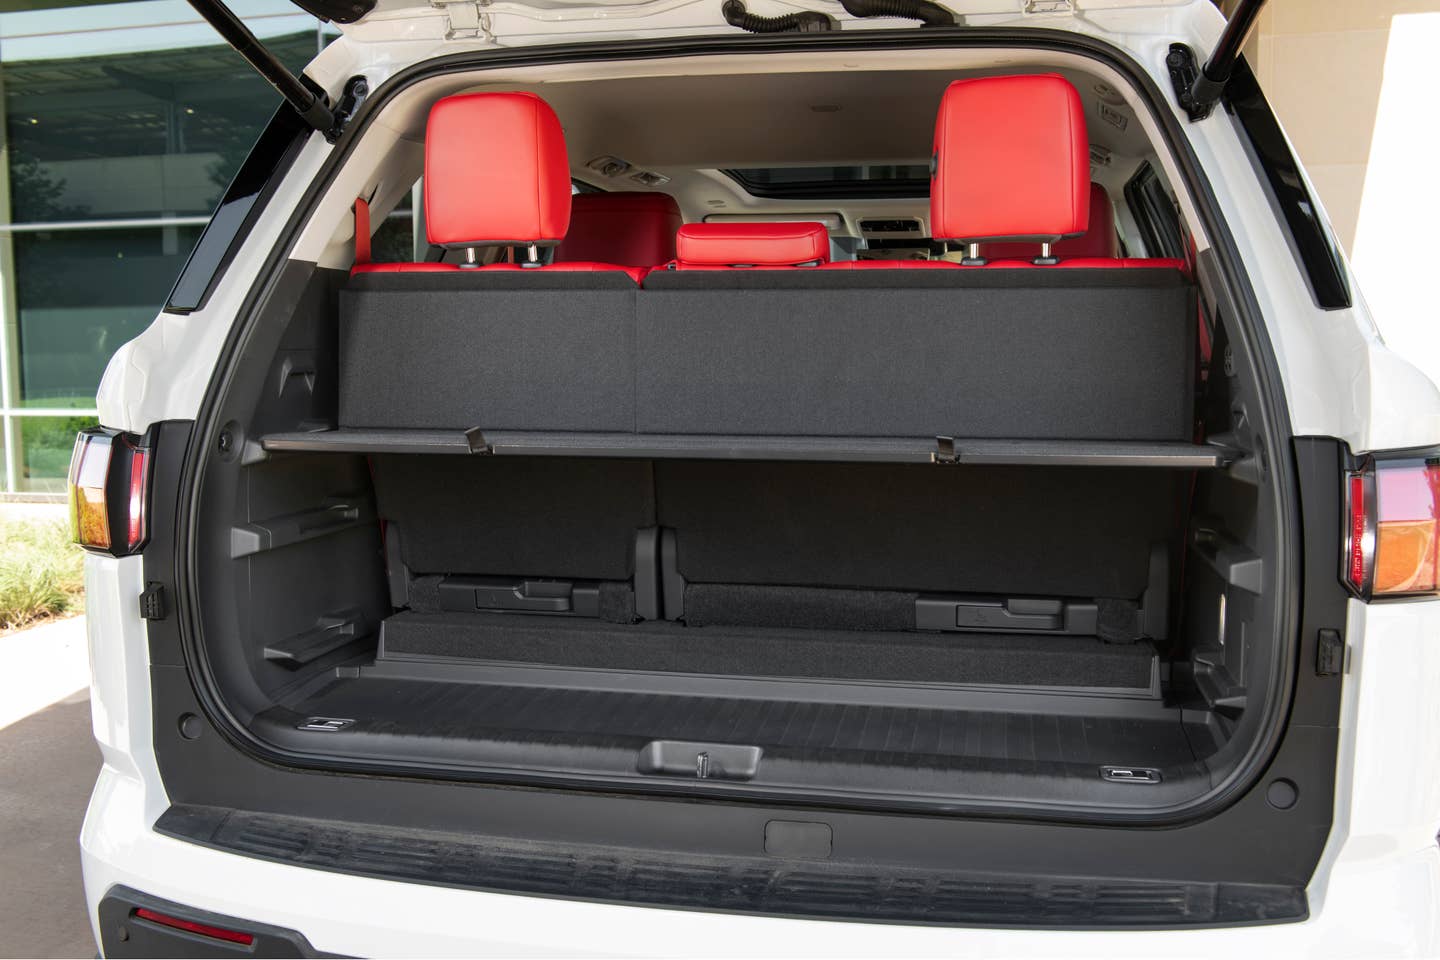 Rear parcel shelf in the back of the Toyota Sequoia TRD Pro